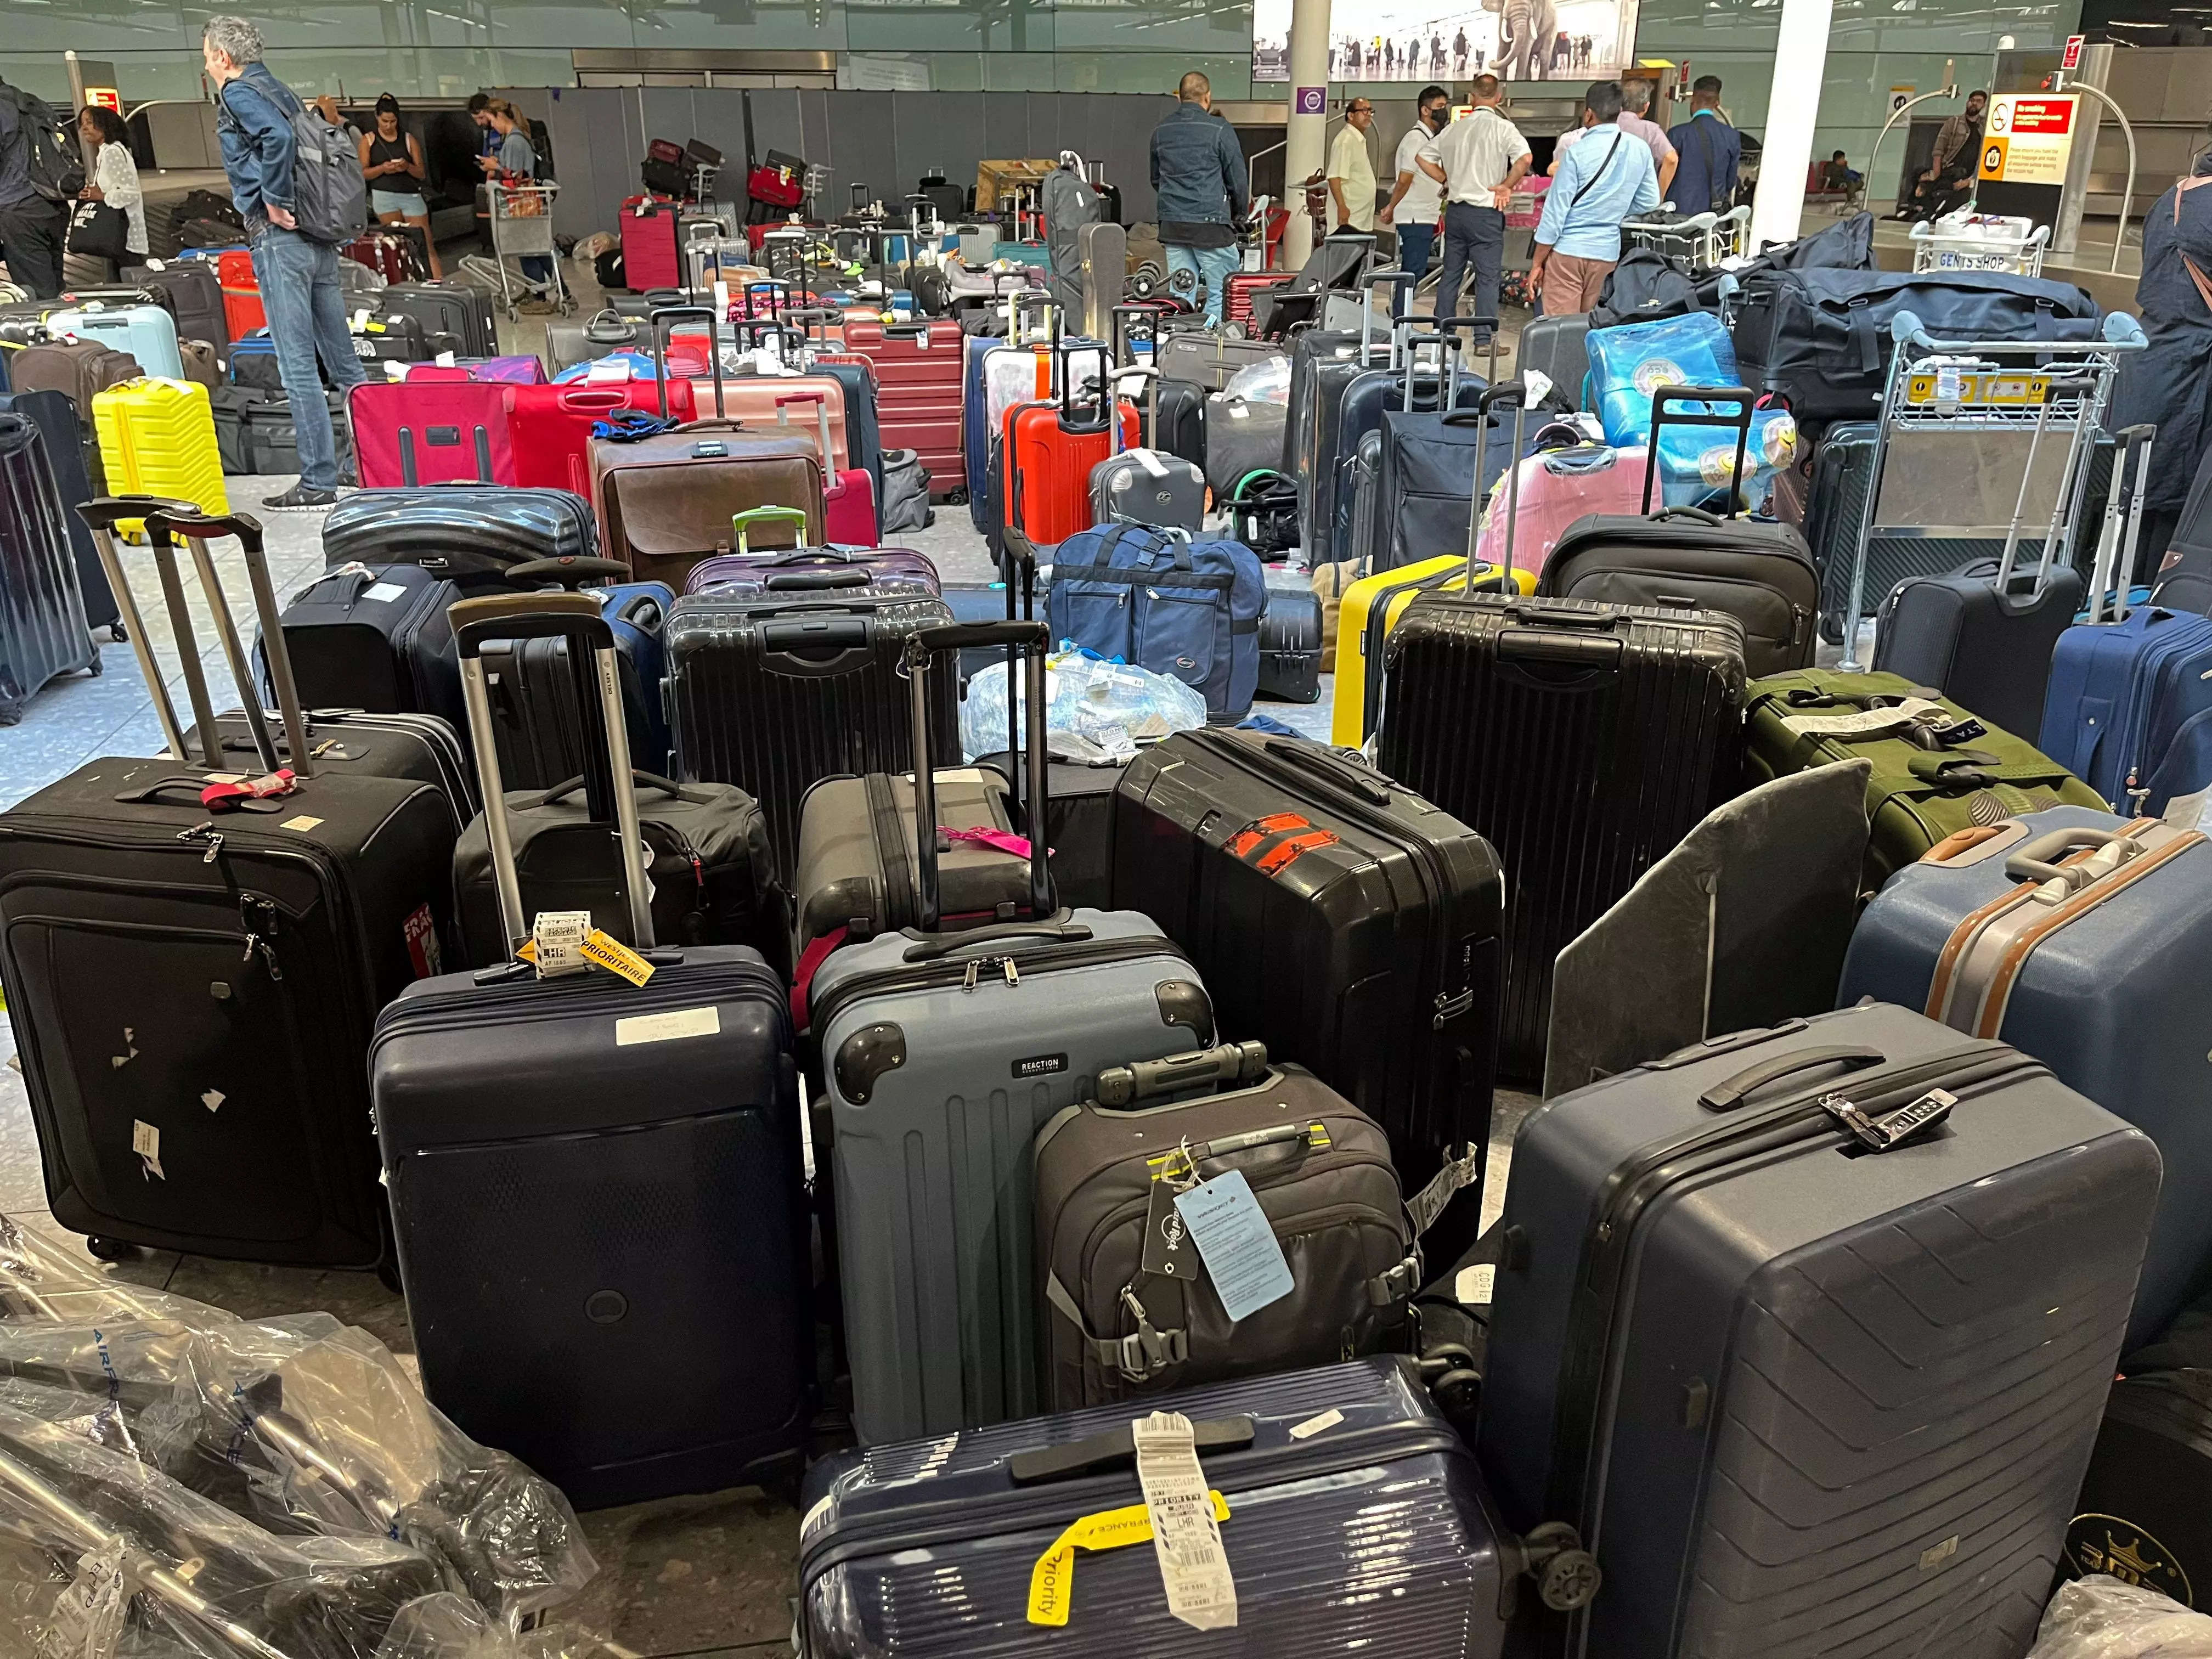 Lost luggage surprise: 97% of bags are found, returned within 2